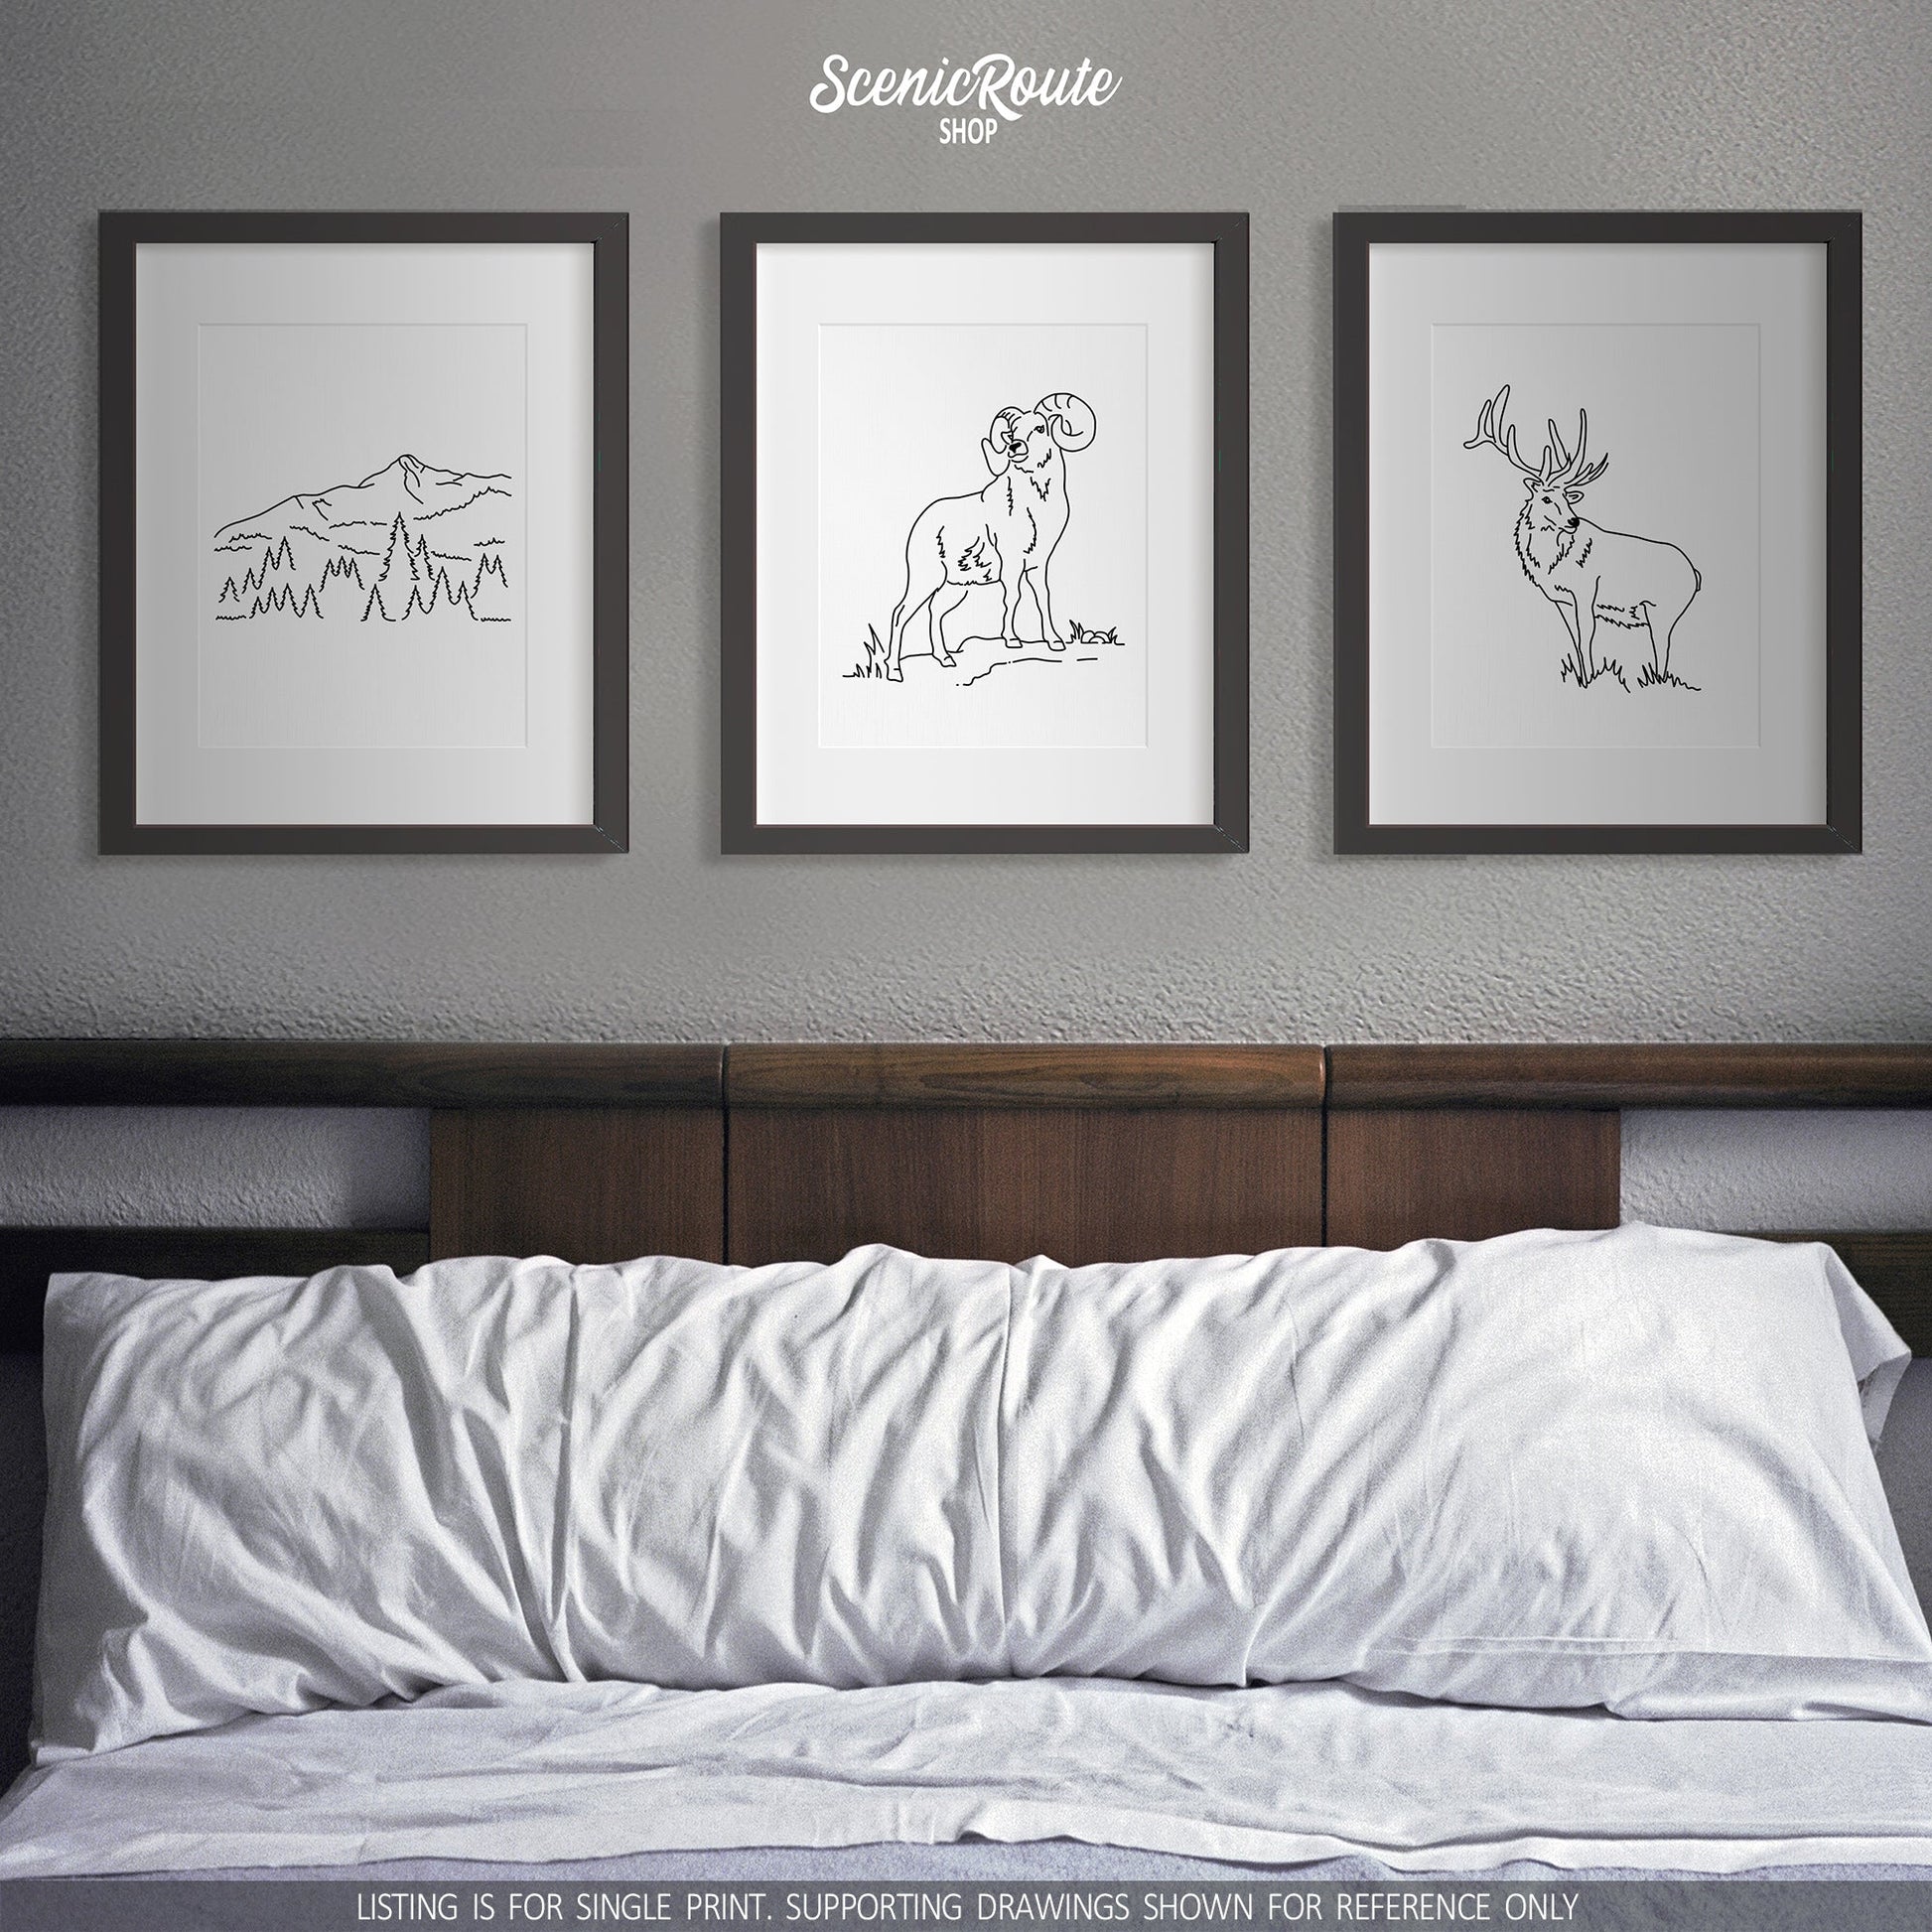 A group of three framed drawings on a white wall above a bed. The line art drawings include Big Sky Montana, Longhorn Sheep, and Elk